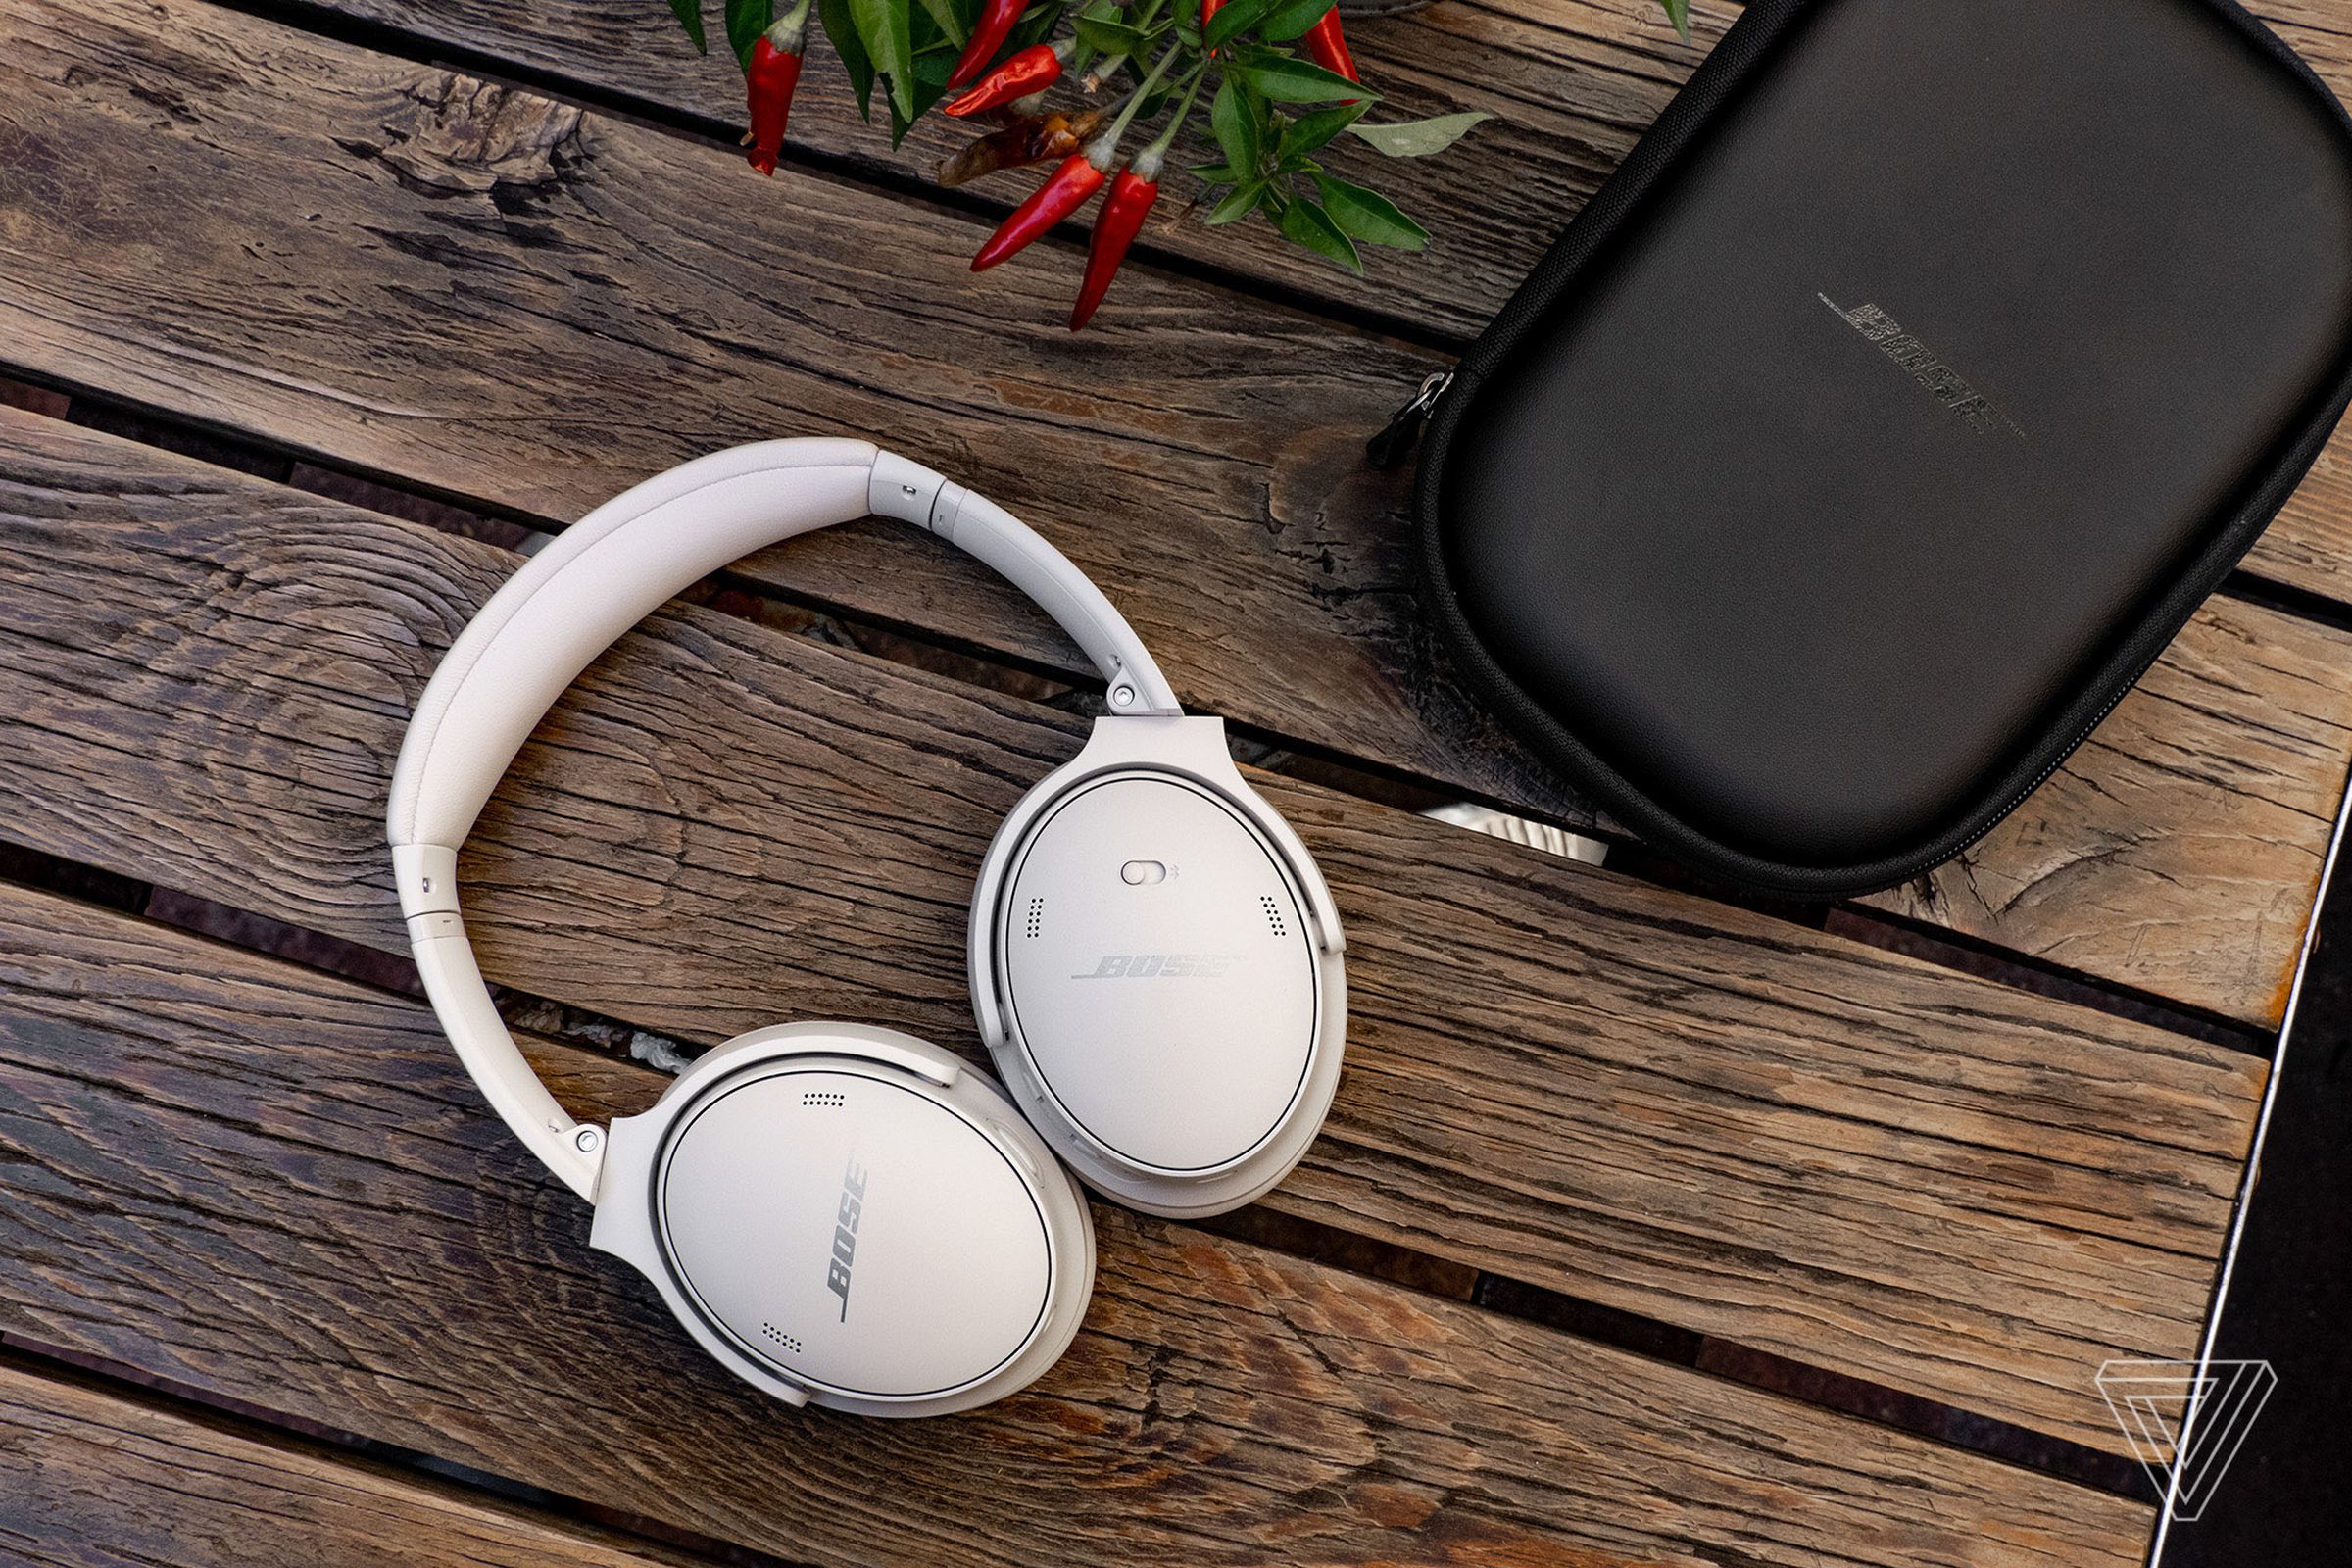 The Bose QuietComfort 45 headphones in white, resting on a wood picnic table next to their case.